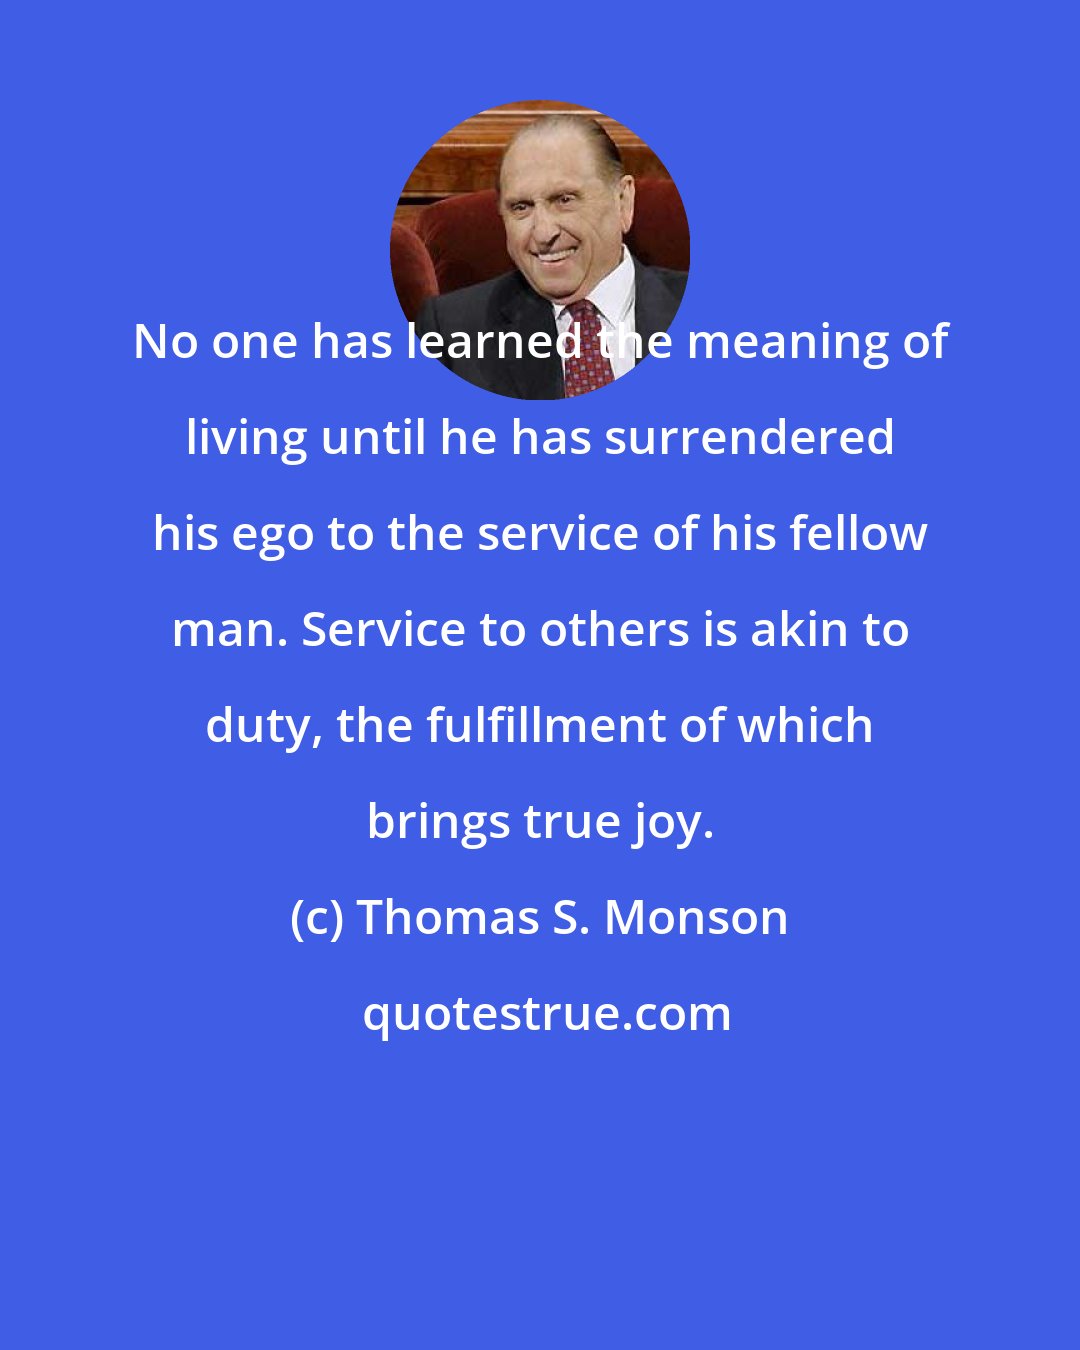 Thomas S. Monson: No one has learned the meaning of living until he has surrendered his ego to the service of his fellow man. Service to others is akin to duty, the fulfillment of which brings true joy.